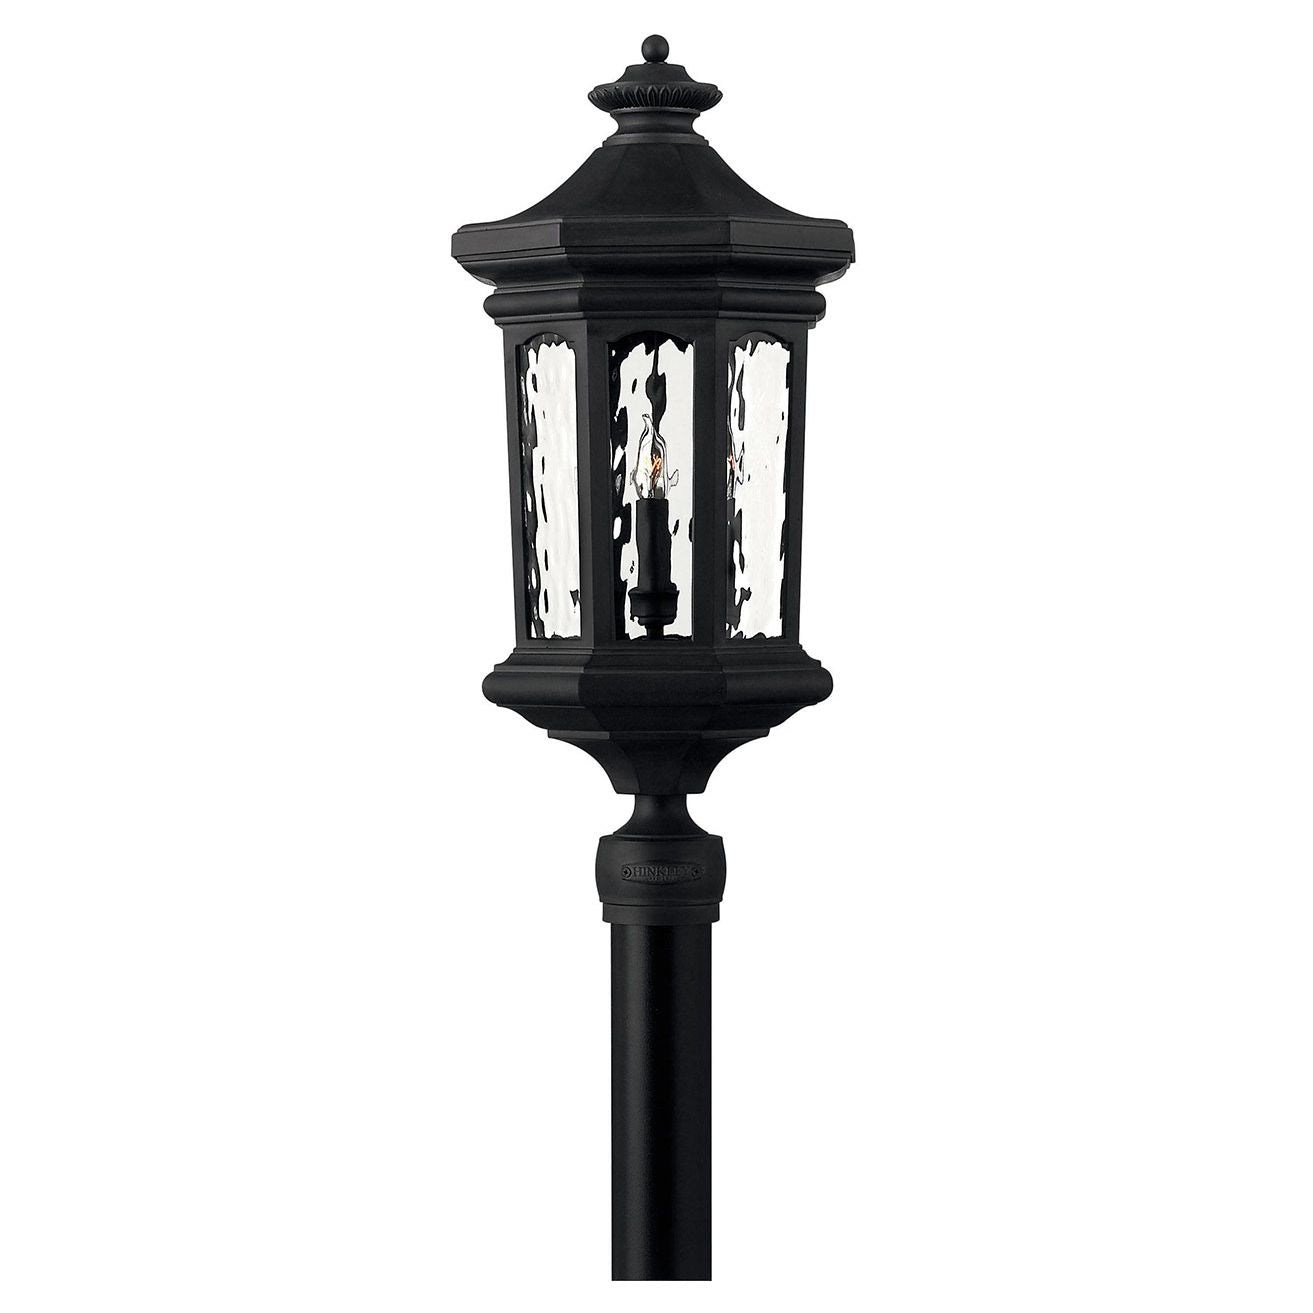 Hinkley 1601-LV - Raley 26" Tall 4 Light Post or Pier Mount Lantern, Low Voltage